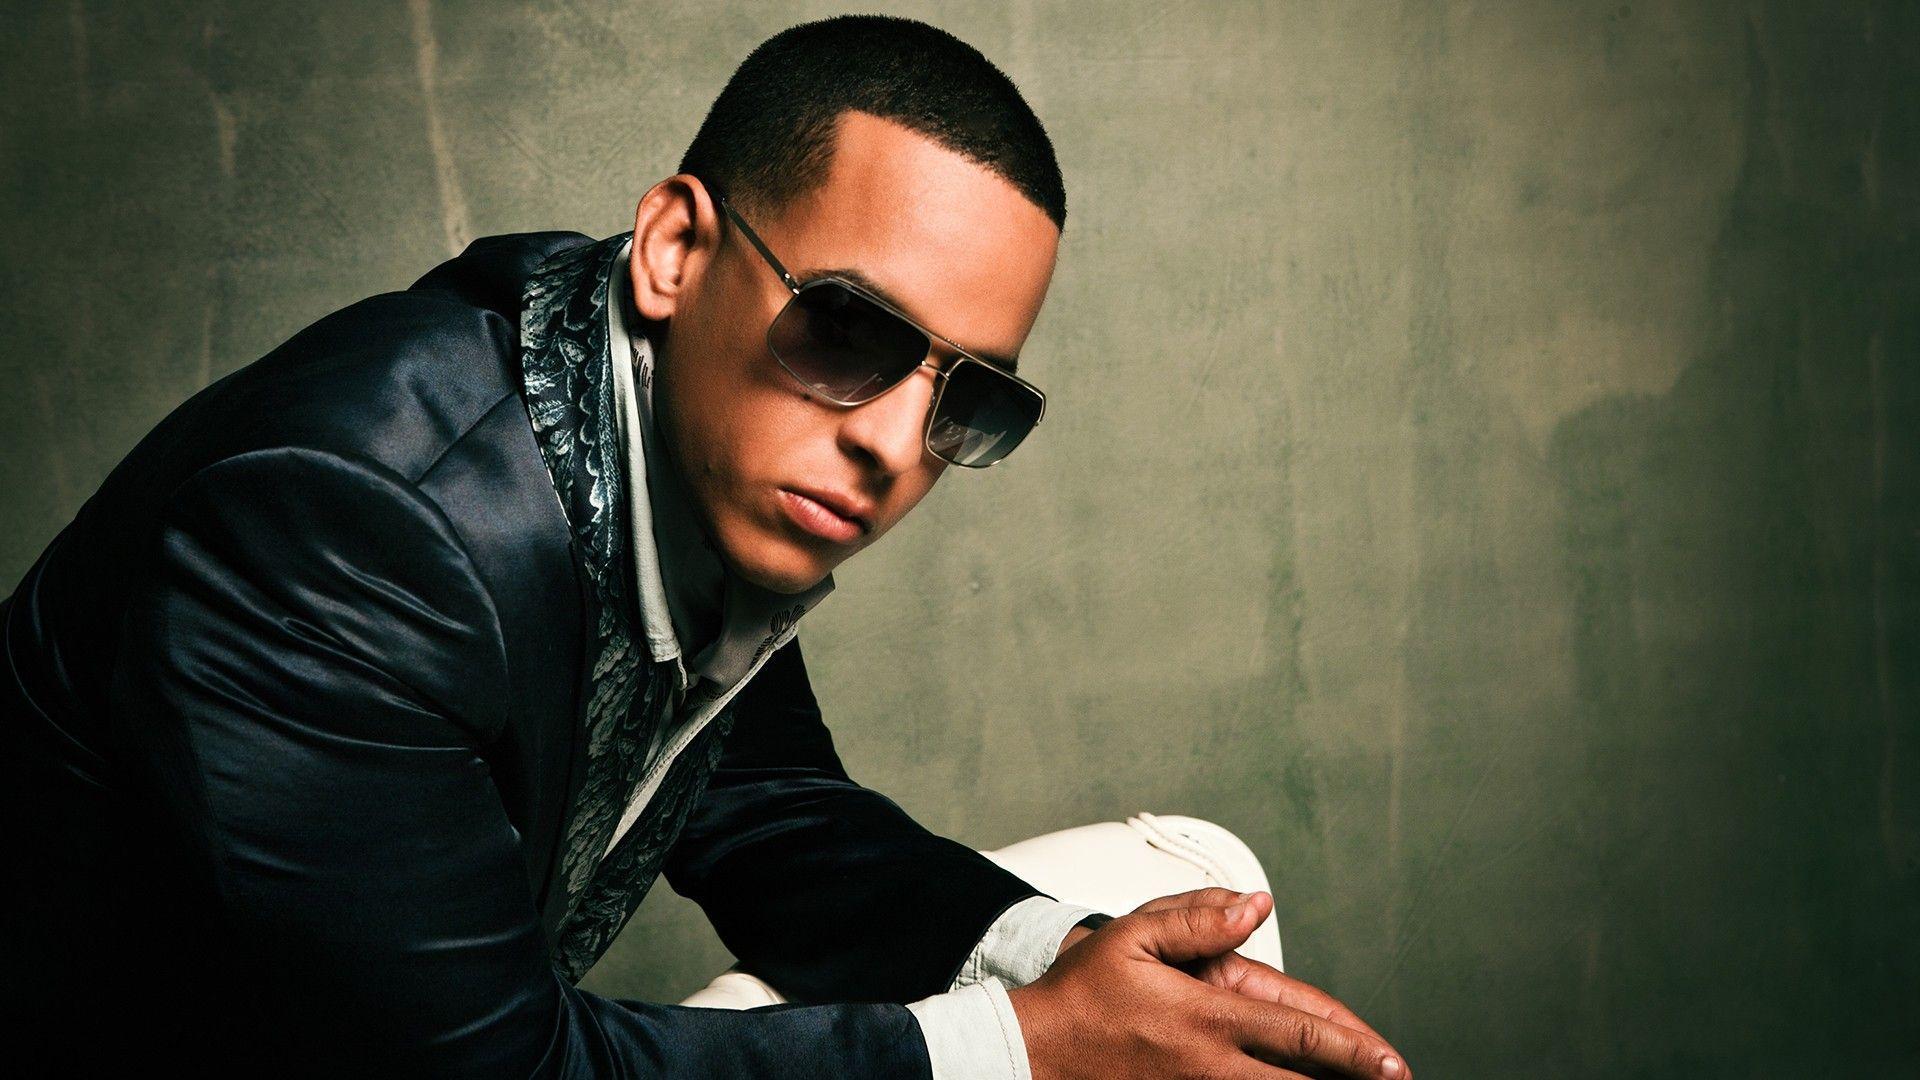 Daddy Yankee Wallpapers HD Backgrounds, Image, Pics, Photos Free.